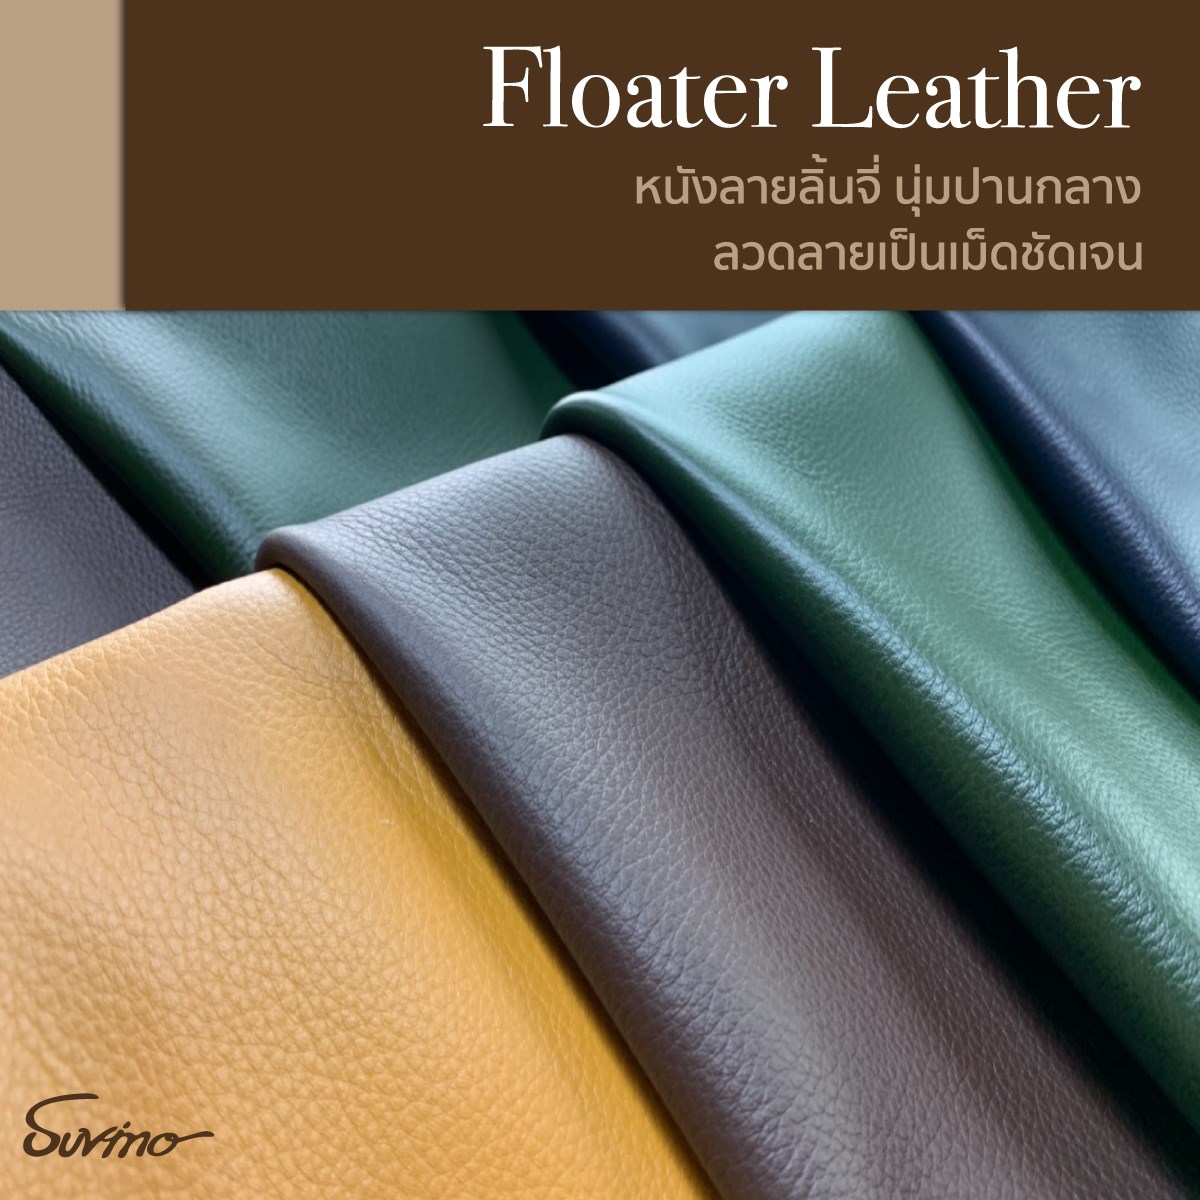 Floater Leather